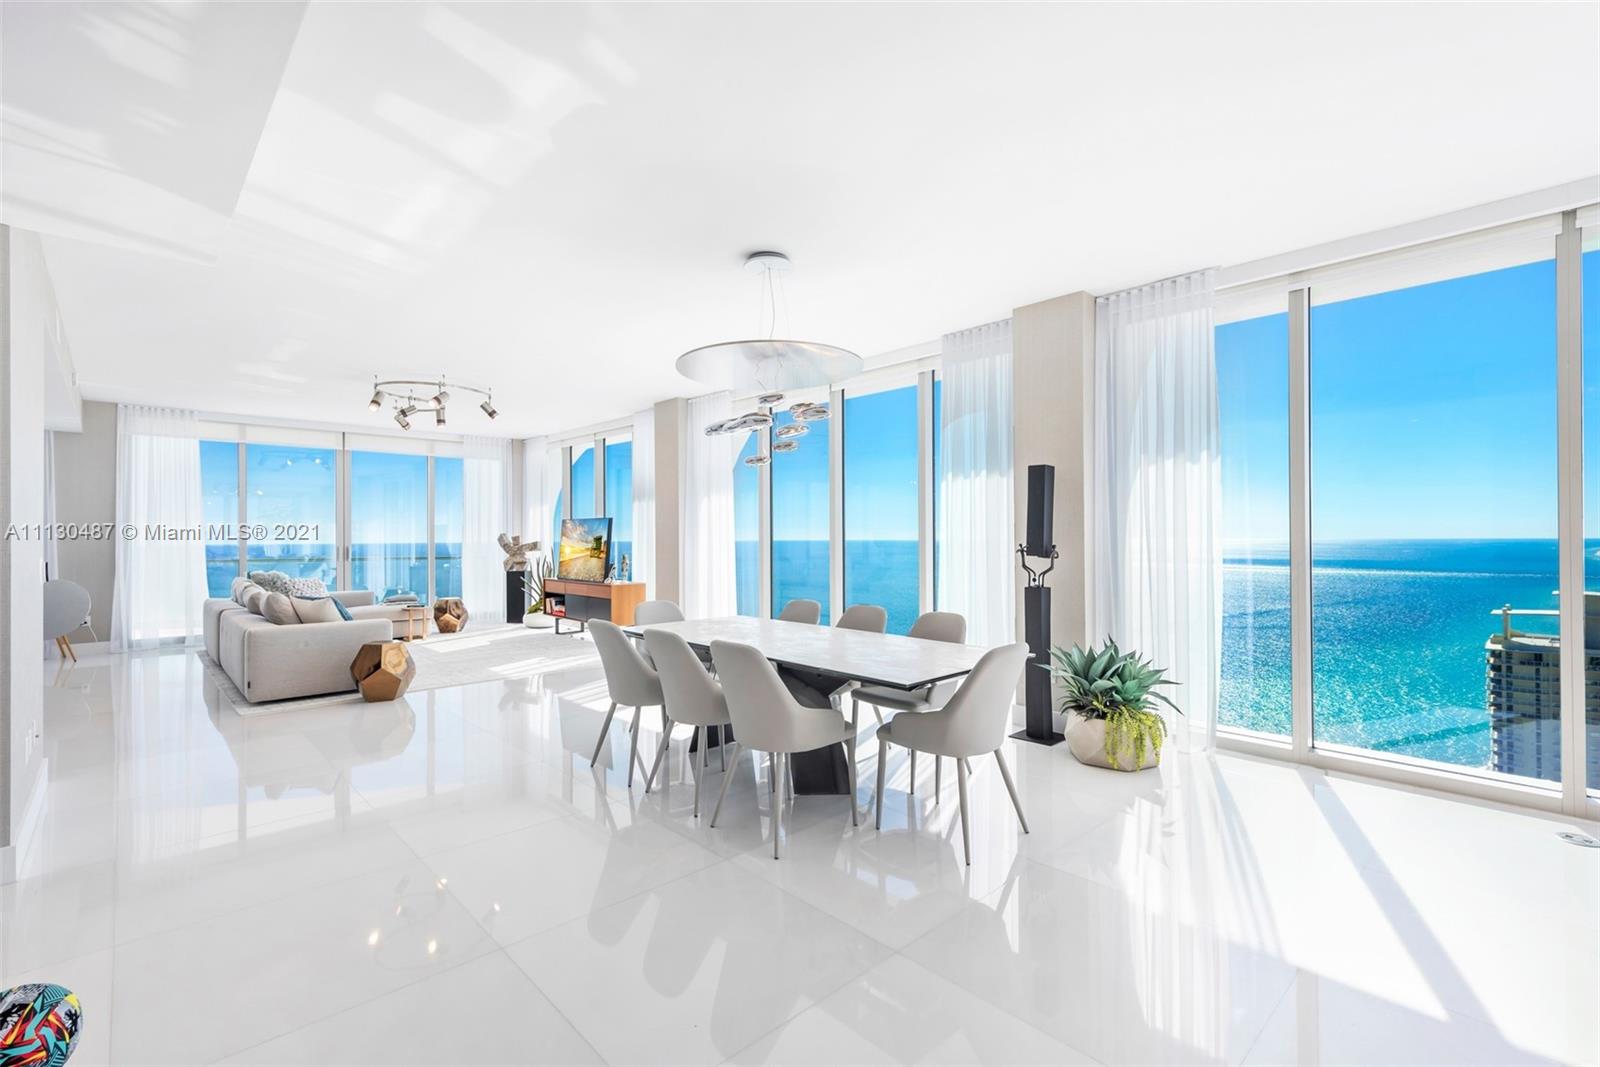 This spectacular mansion in the sky has unobstructed 180’ views of the ocean and the city. With 5 beds, 6.5 bath, 4,361 SF, this corner unit has the ideal floorplan. Featuring an expansive oceanfront master suite, bathroom and walk-in closet. 3 additional bedrooms with en-suite bathrooms as well as a service quarters and laundry room. Additional storage unit and 3 assigned parking spaces included. Take advantage of the resort like amenities including the famous Tata Harper spa, beach-side heated pool, private beach pavilion with beach services, resident restaurant, bar and separate breakfast, gym, library, billiard room, child play area, teen room, valet and more. The unit is now vacant, easy to show!!!